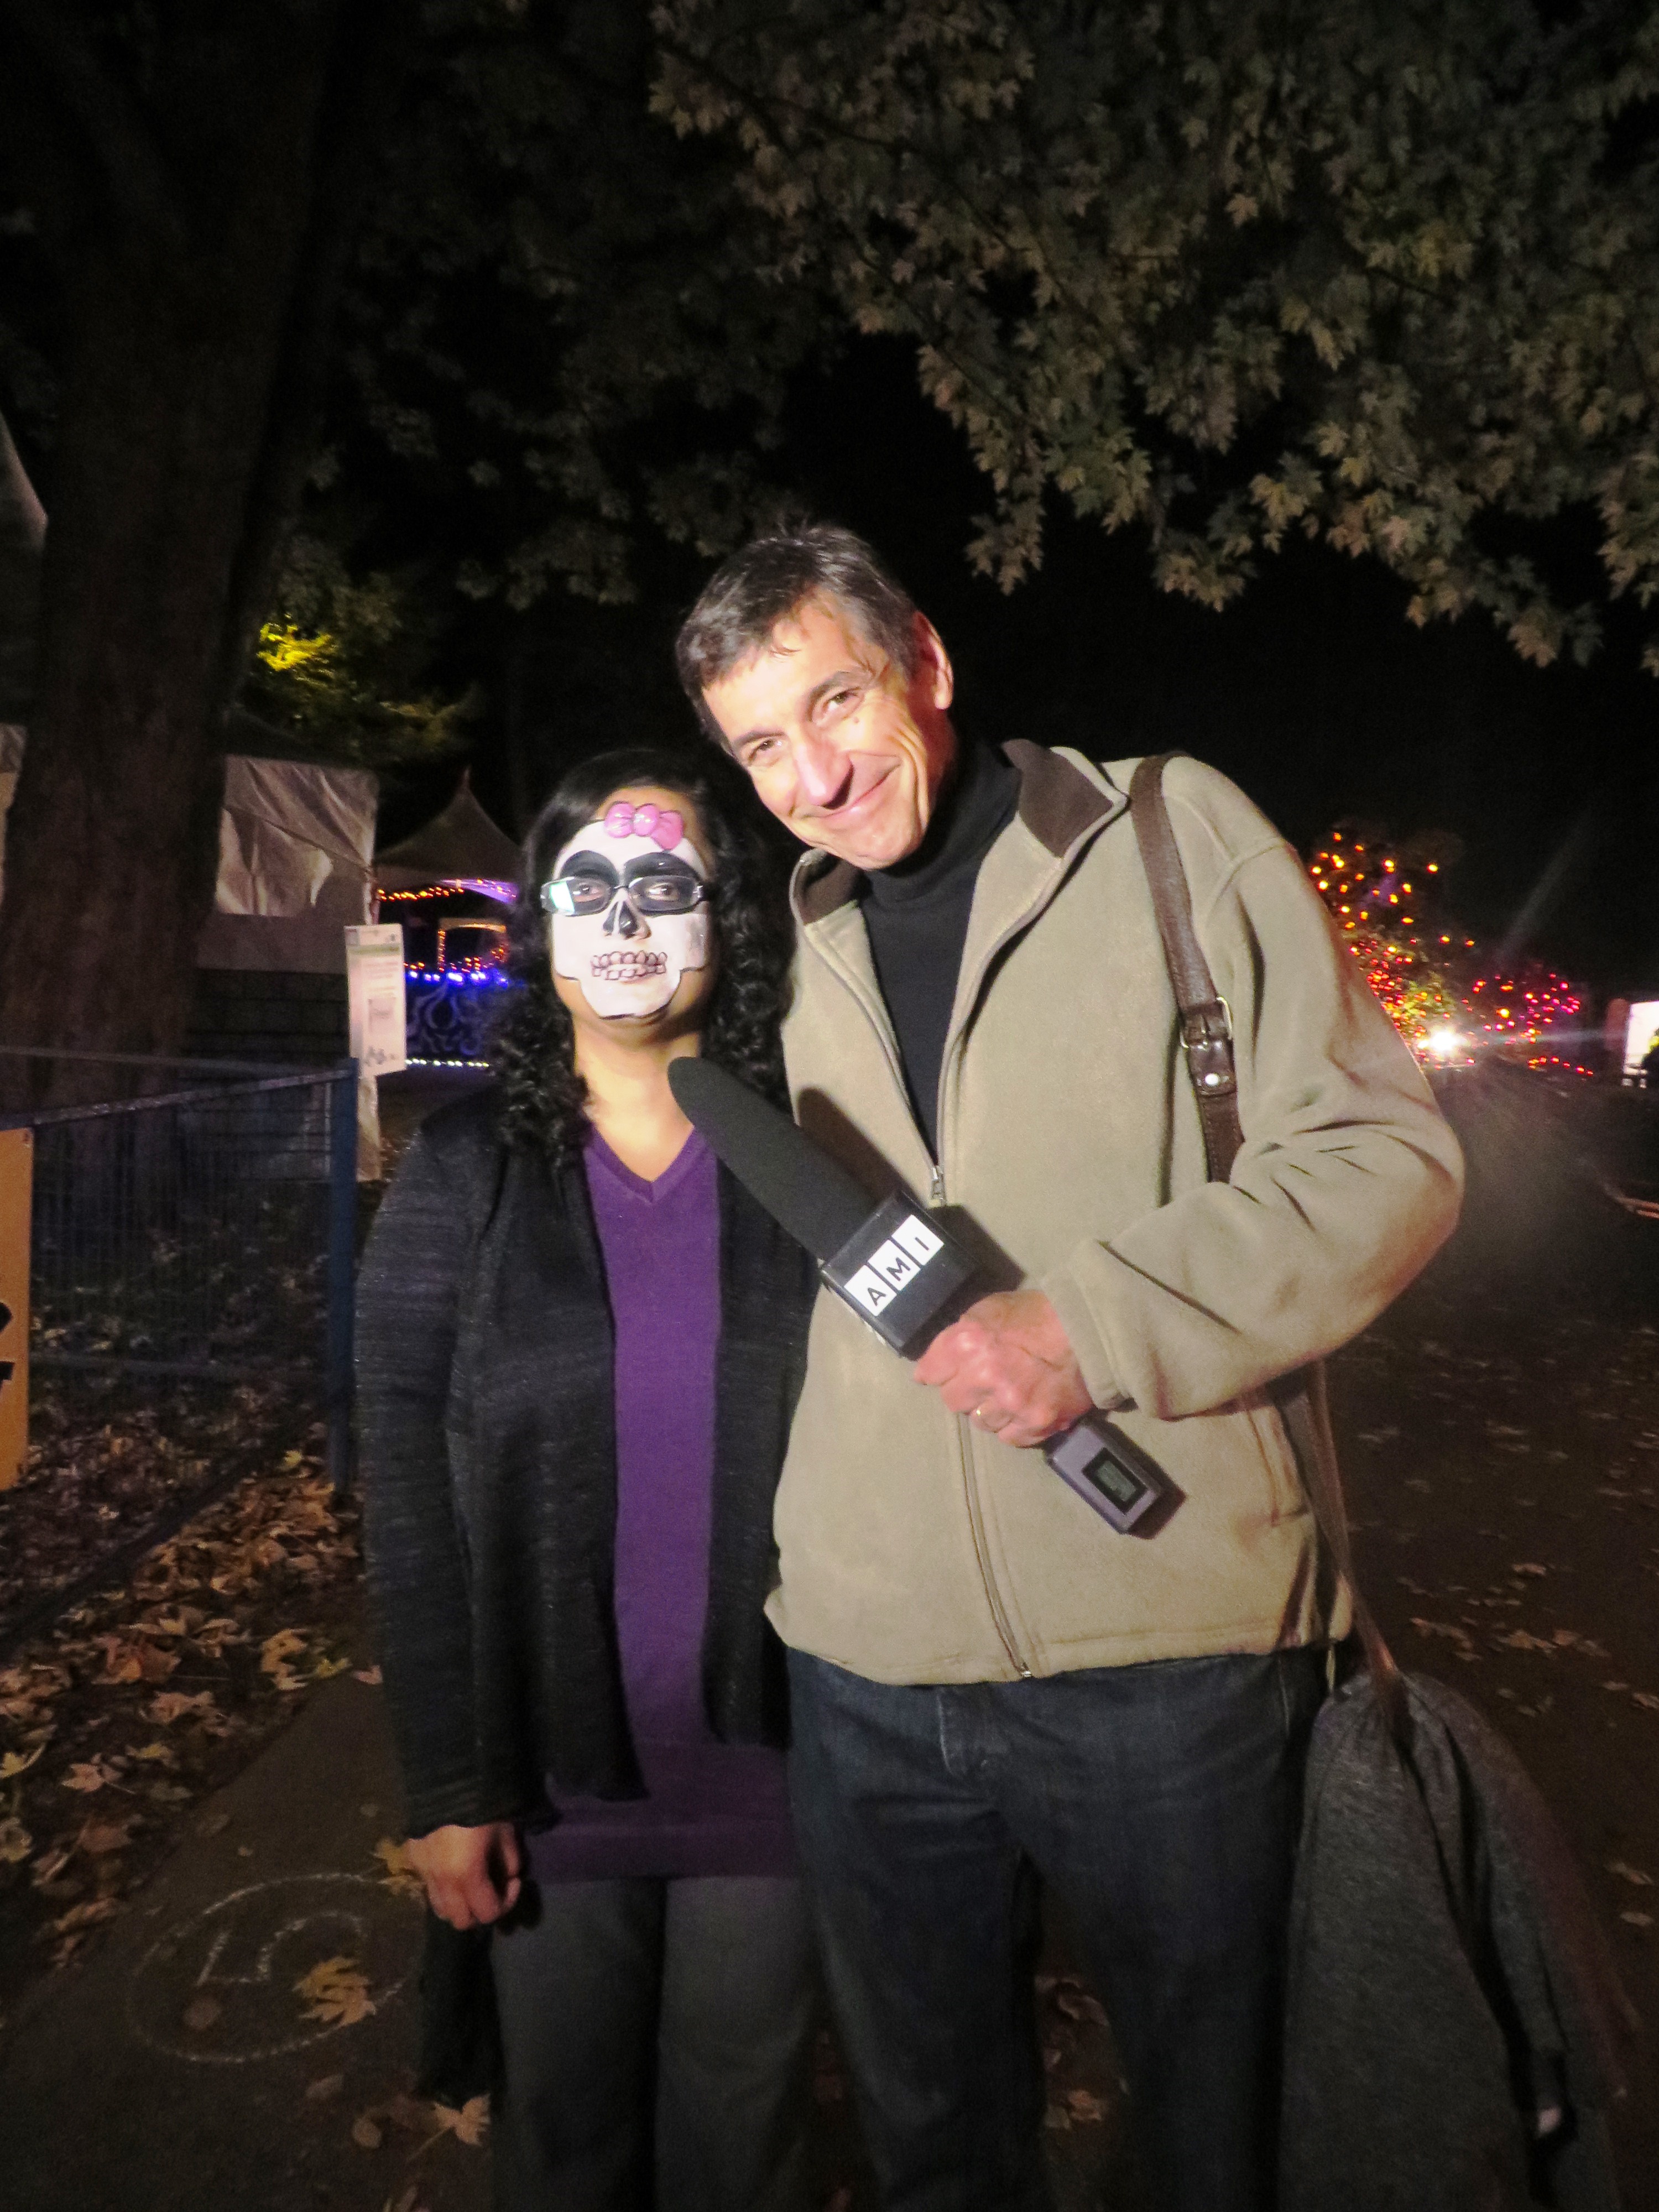 Kristy, her face painted with a Hello Kitty skull, stands with Peter Hall